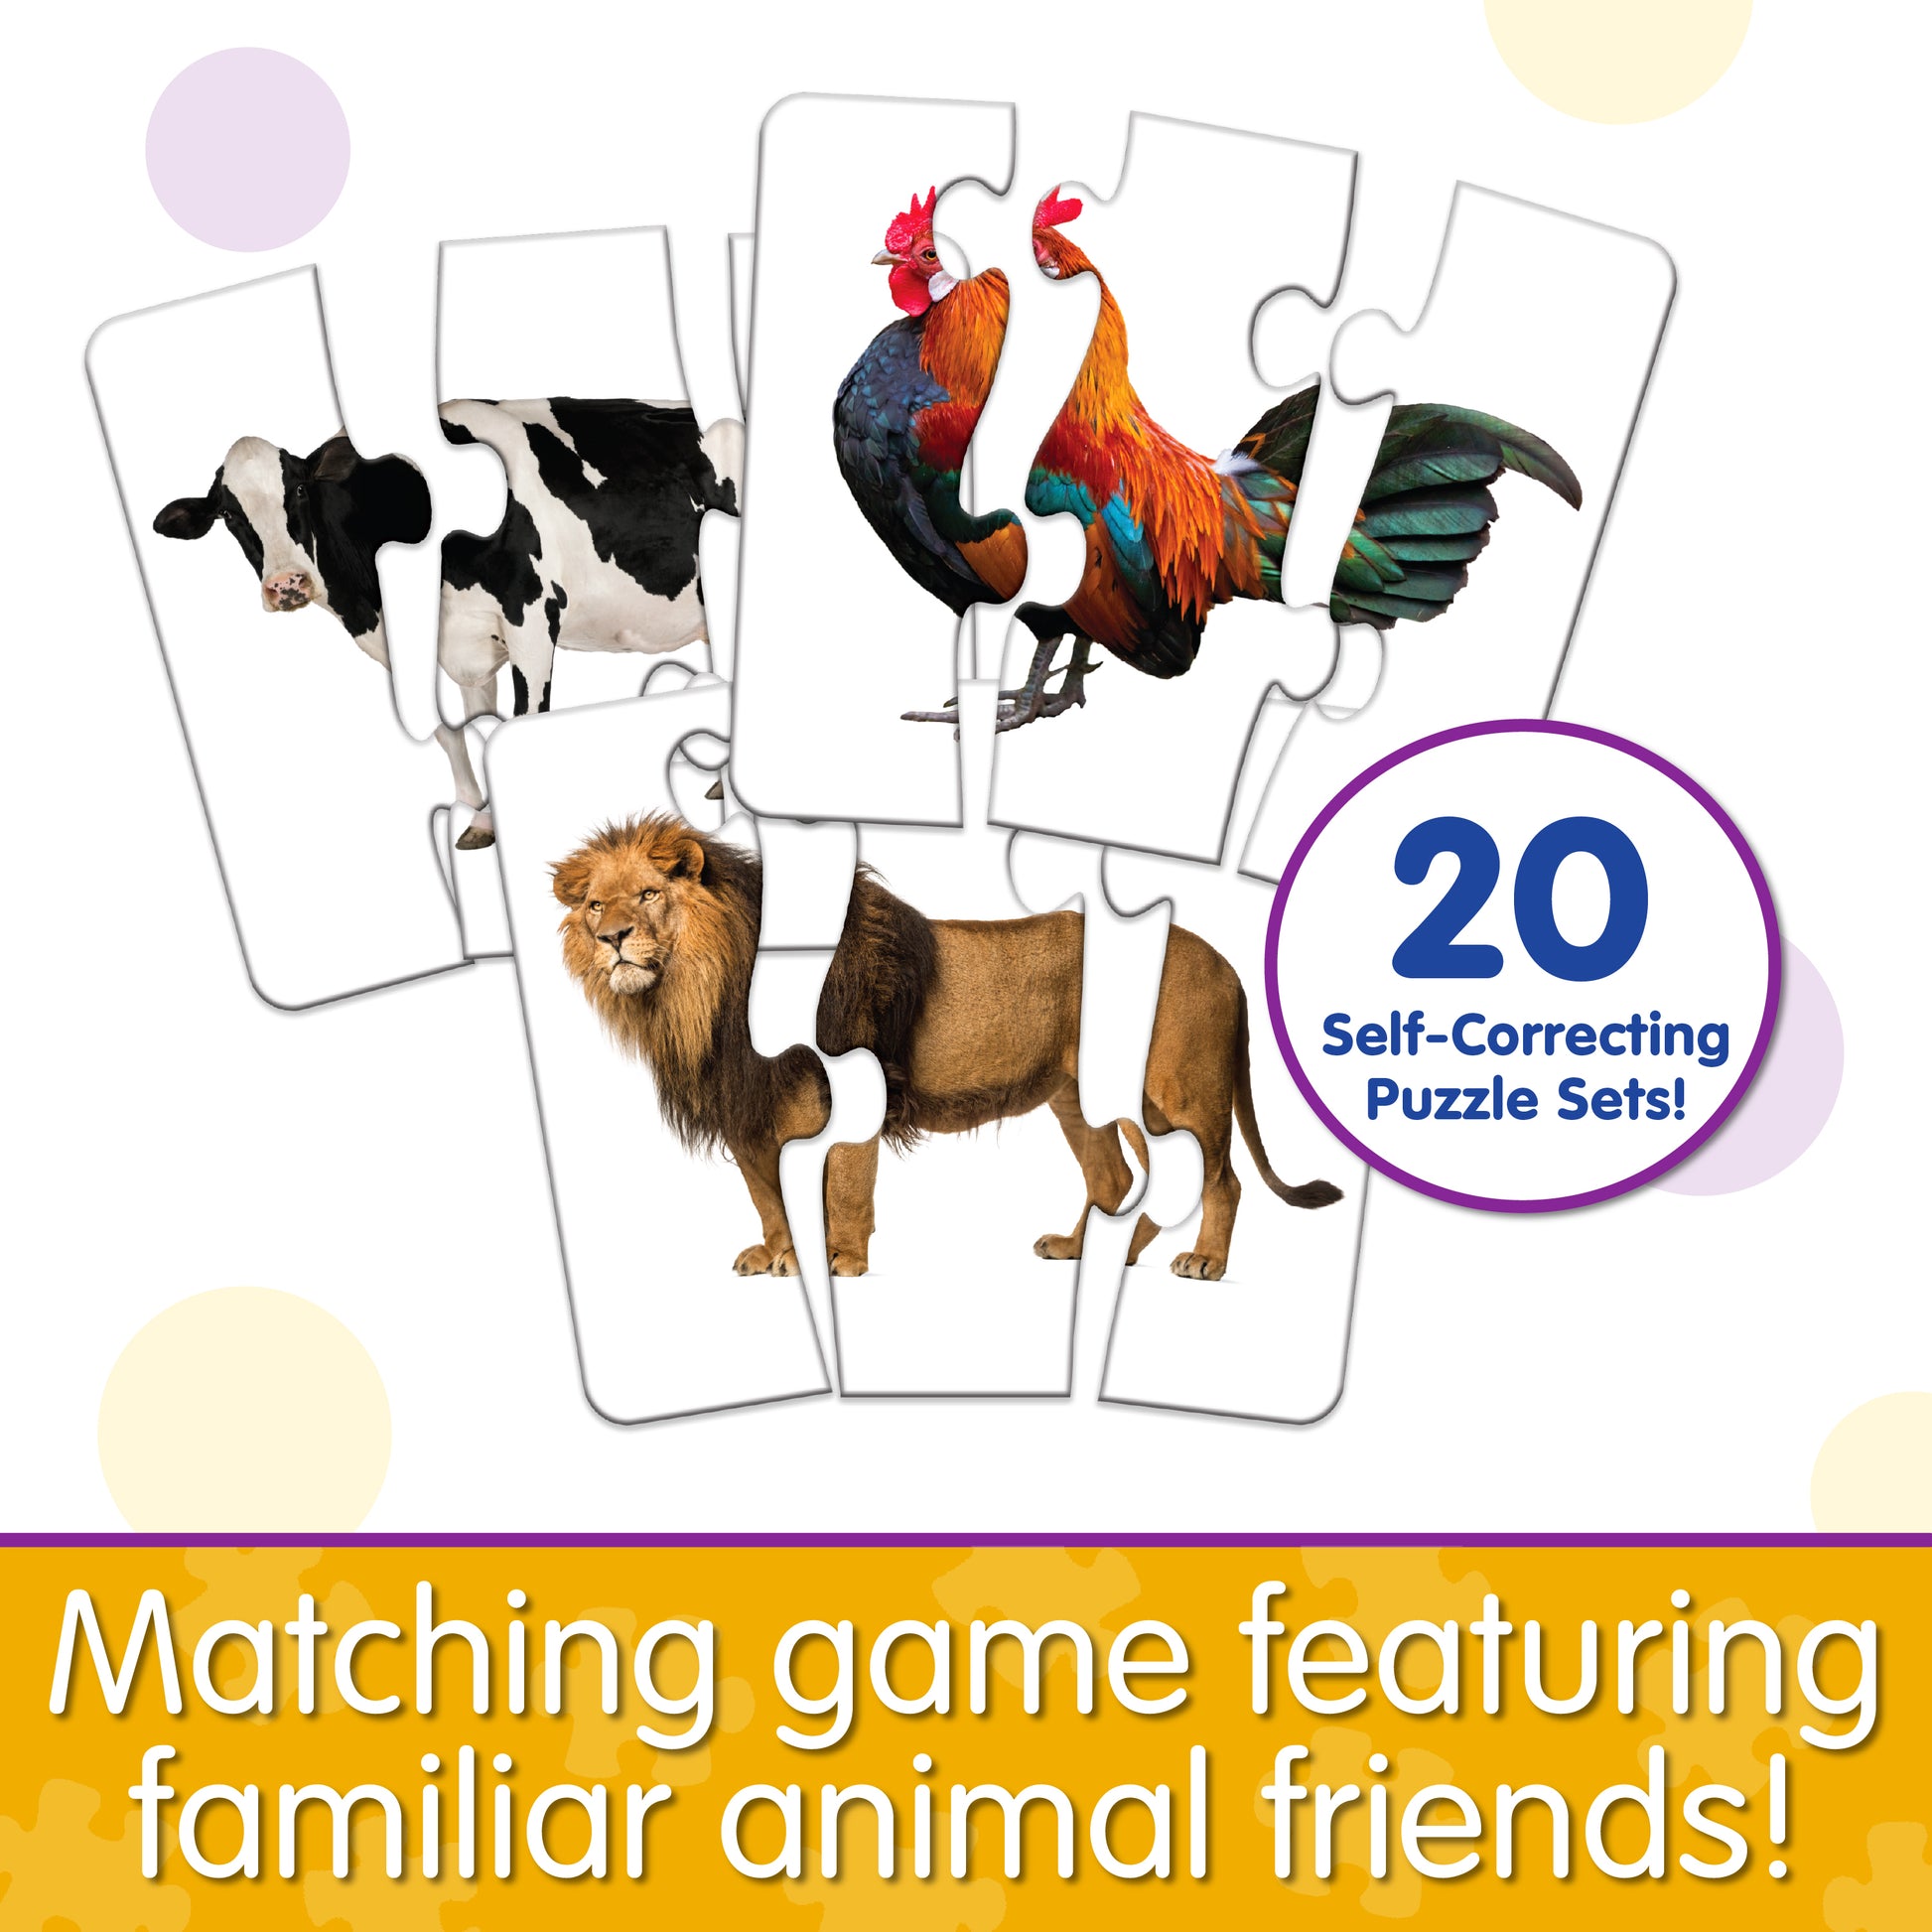 Infographic about Match It - Head to Tail that says, "Matching game featuring familiar animal friends!"